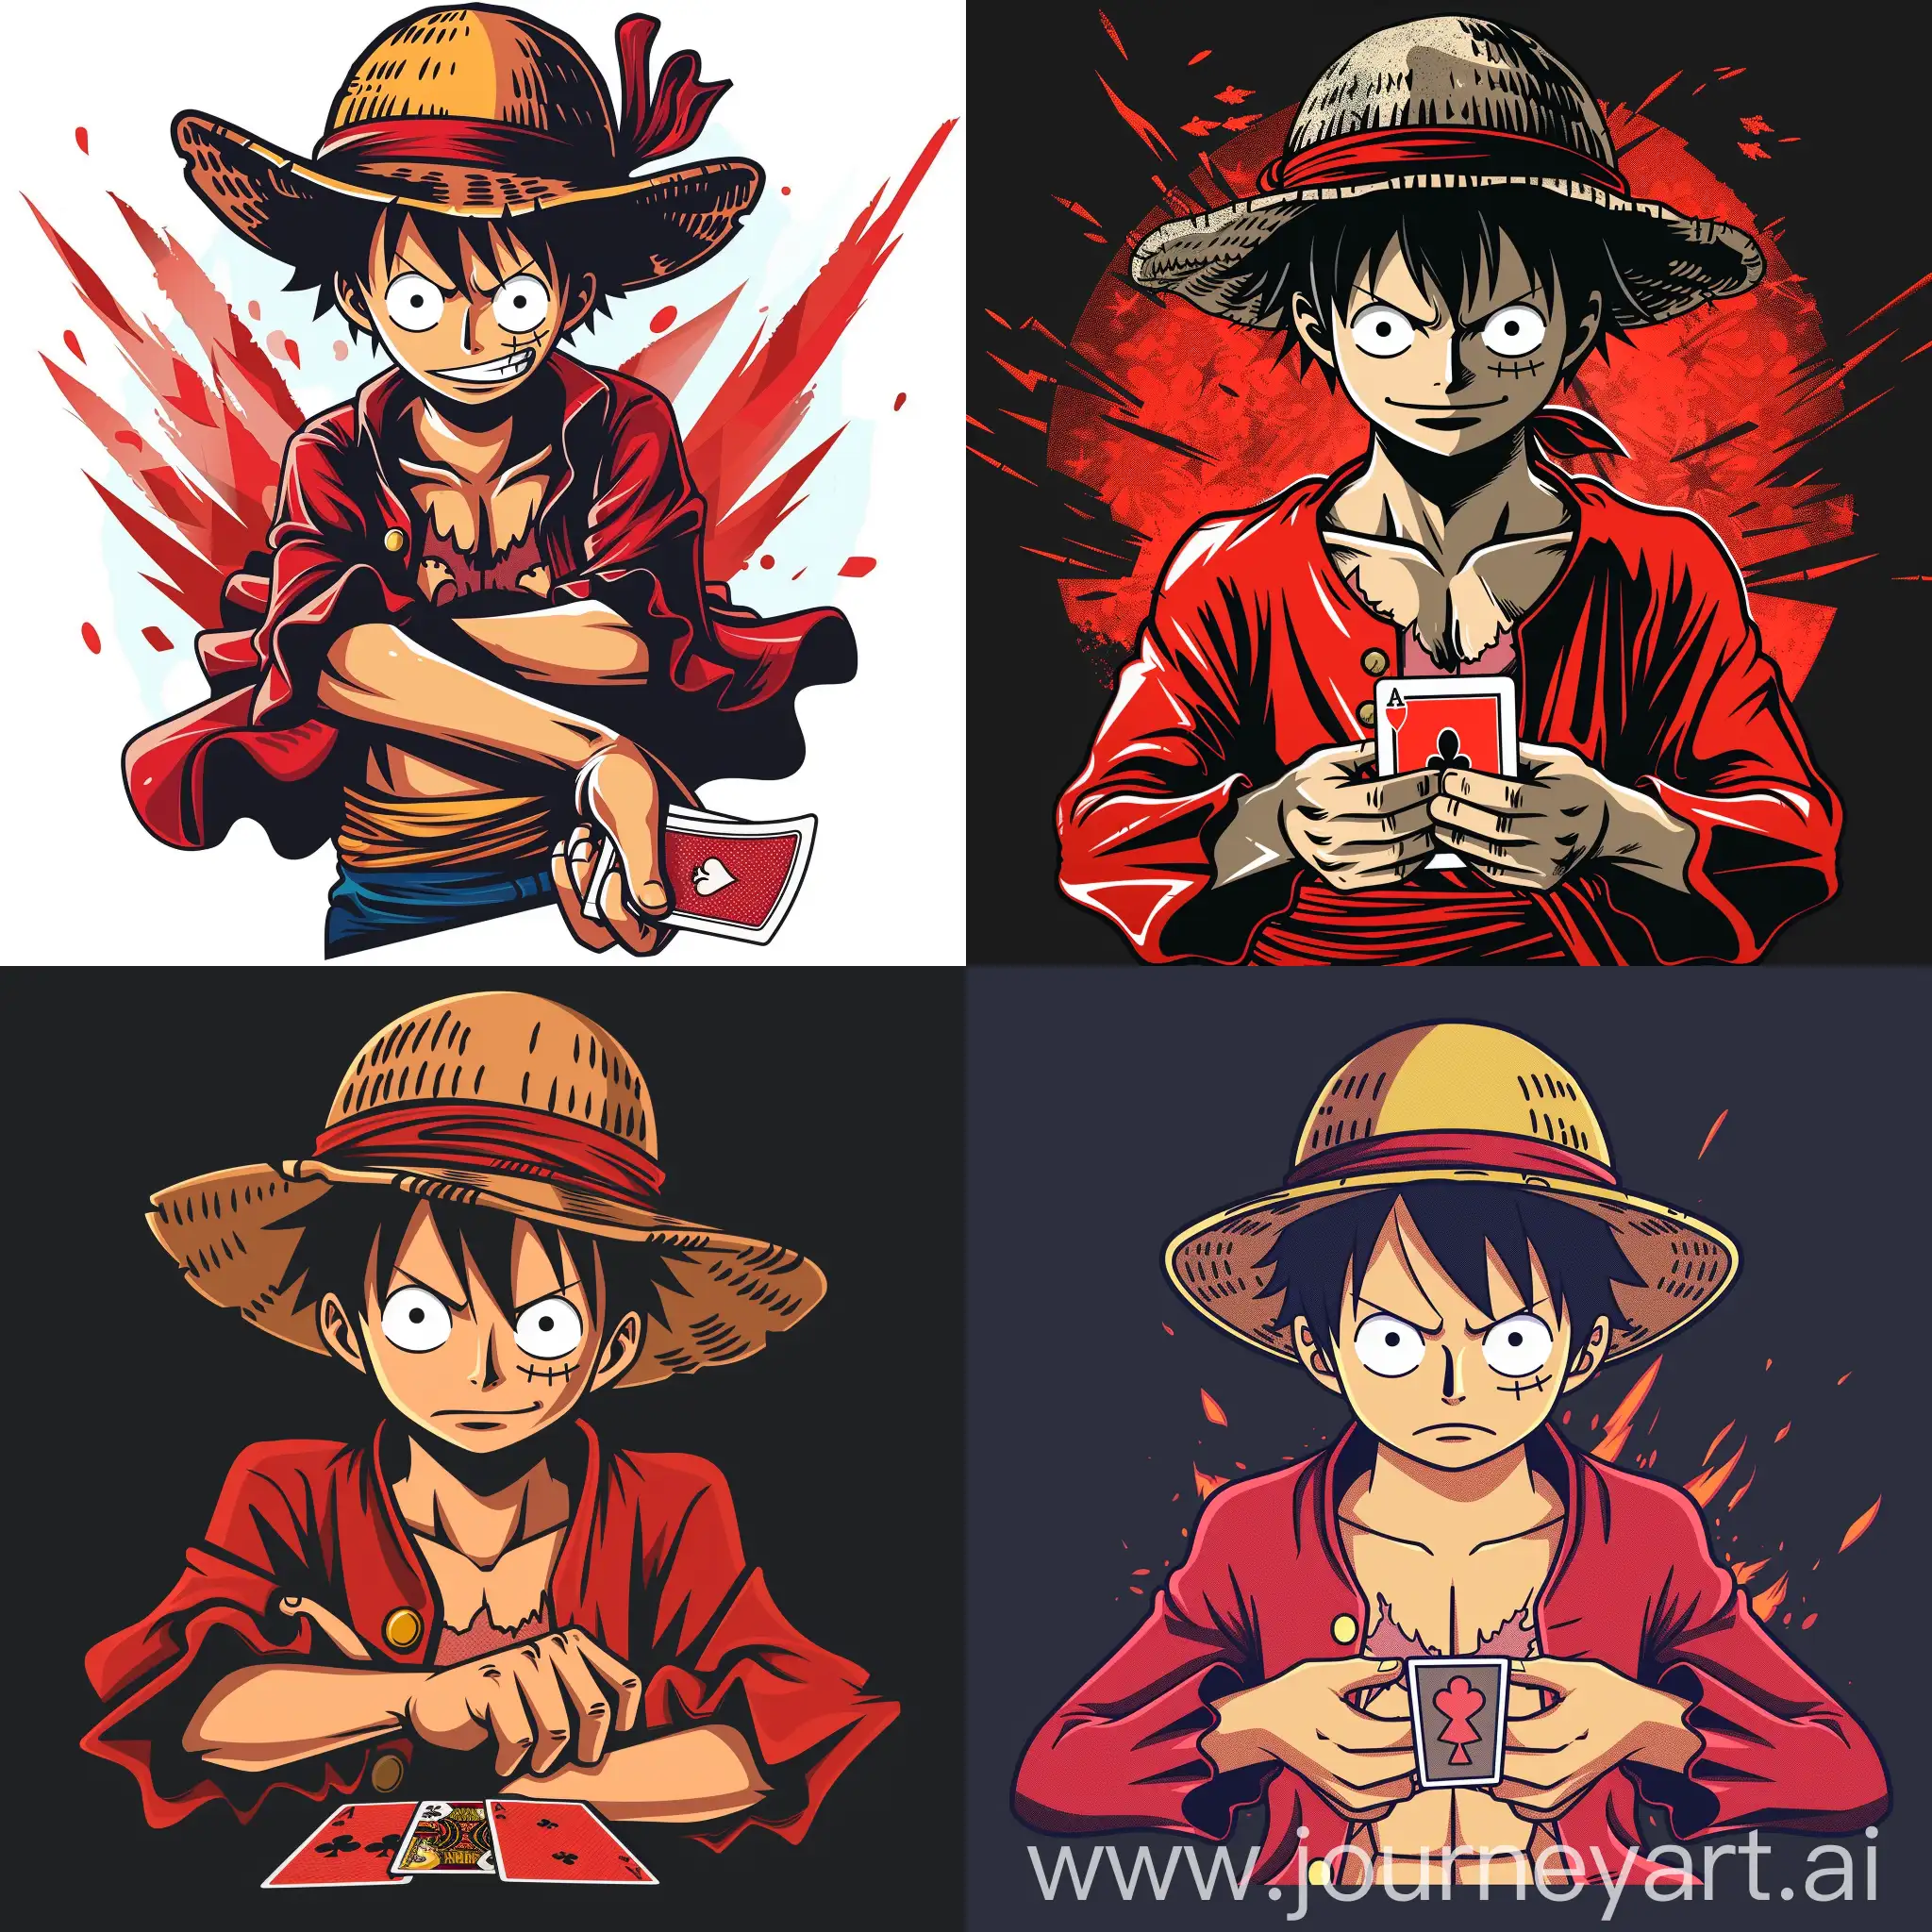 Create logo for channel related to anime and stars in the logo must be anime character Luffy which playing anime cards or holding, style of art must be like smooth anime in Japanese style